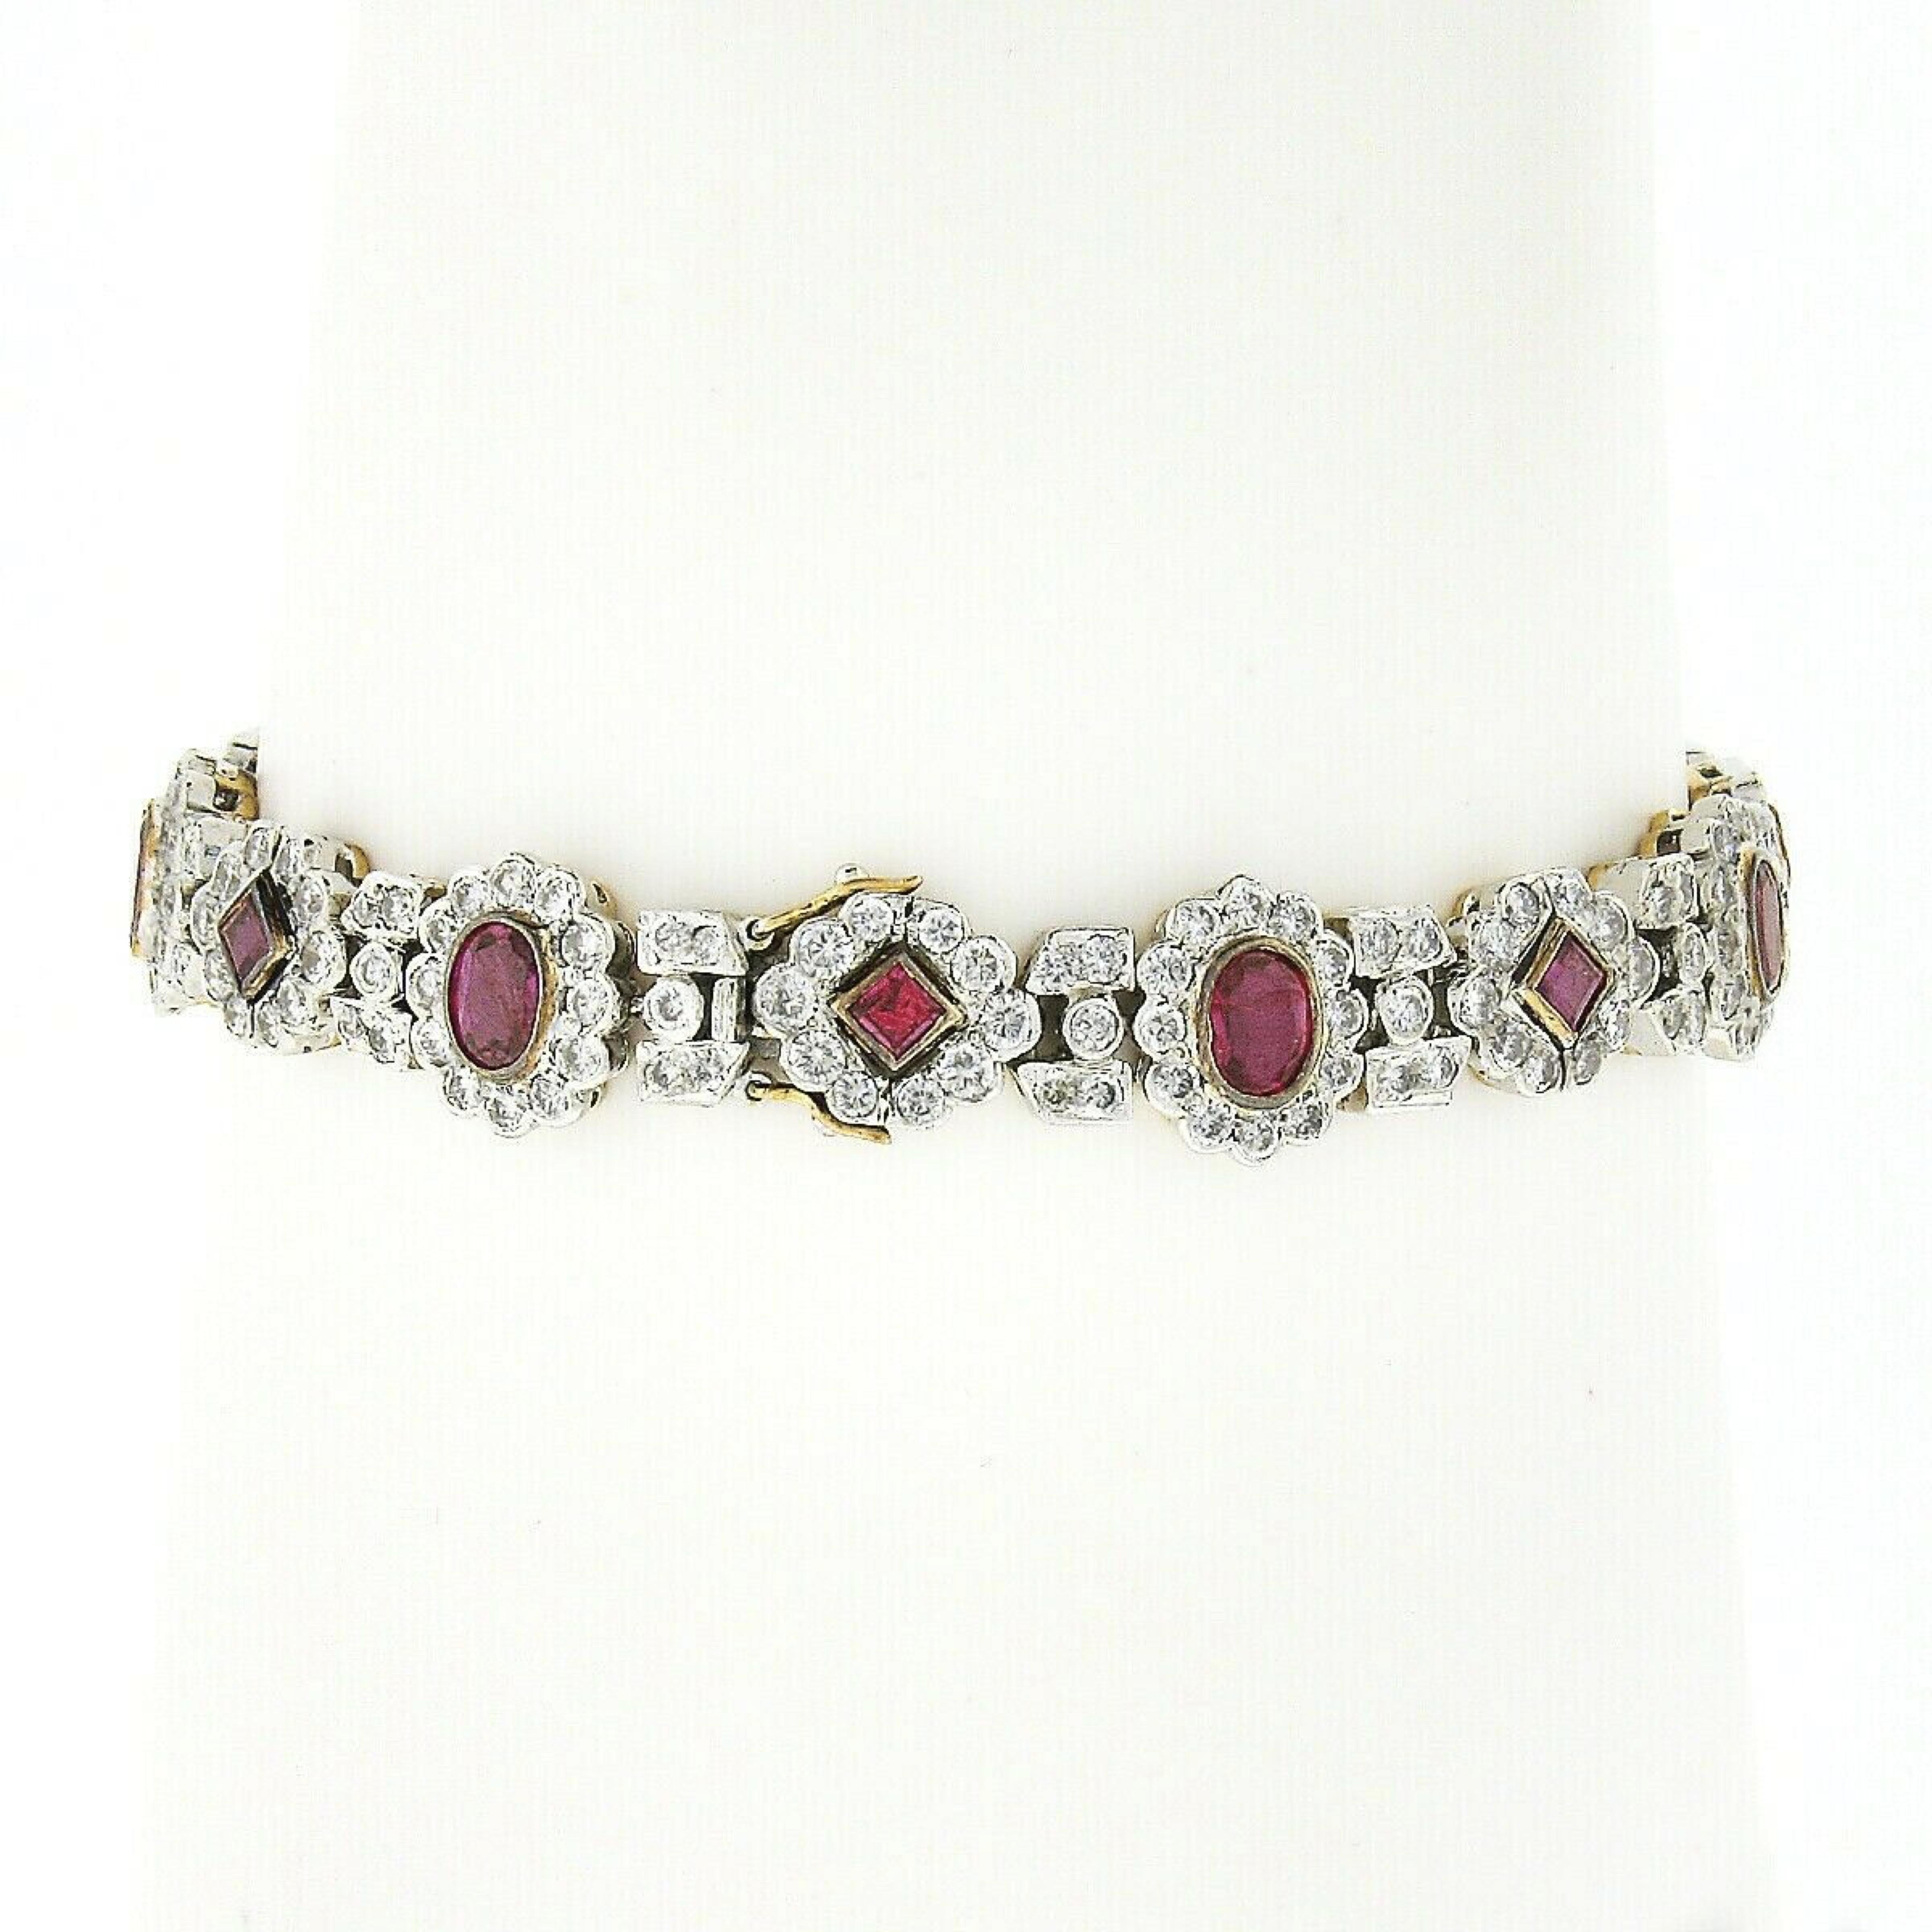 Here we have an absolutely magnificent ruby and diamond vintage bracelet crafted in solid 14k yellow gold with a solid 14k white gold top. The bracelet is very well structured from ruby and diamond halo flower links throughout. The very fine rubies